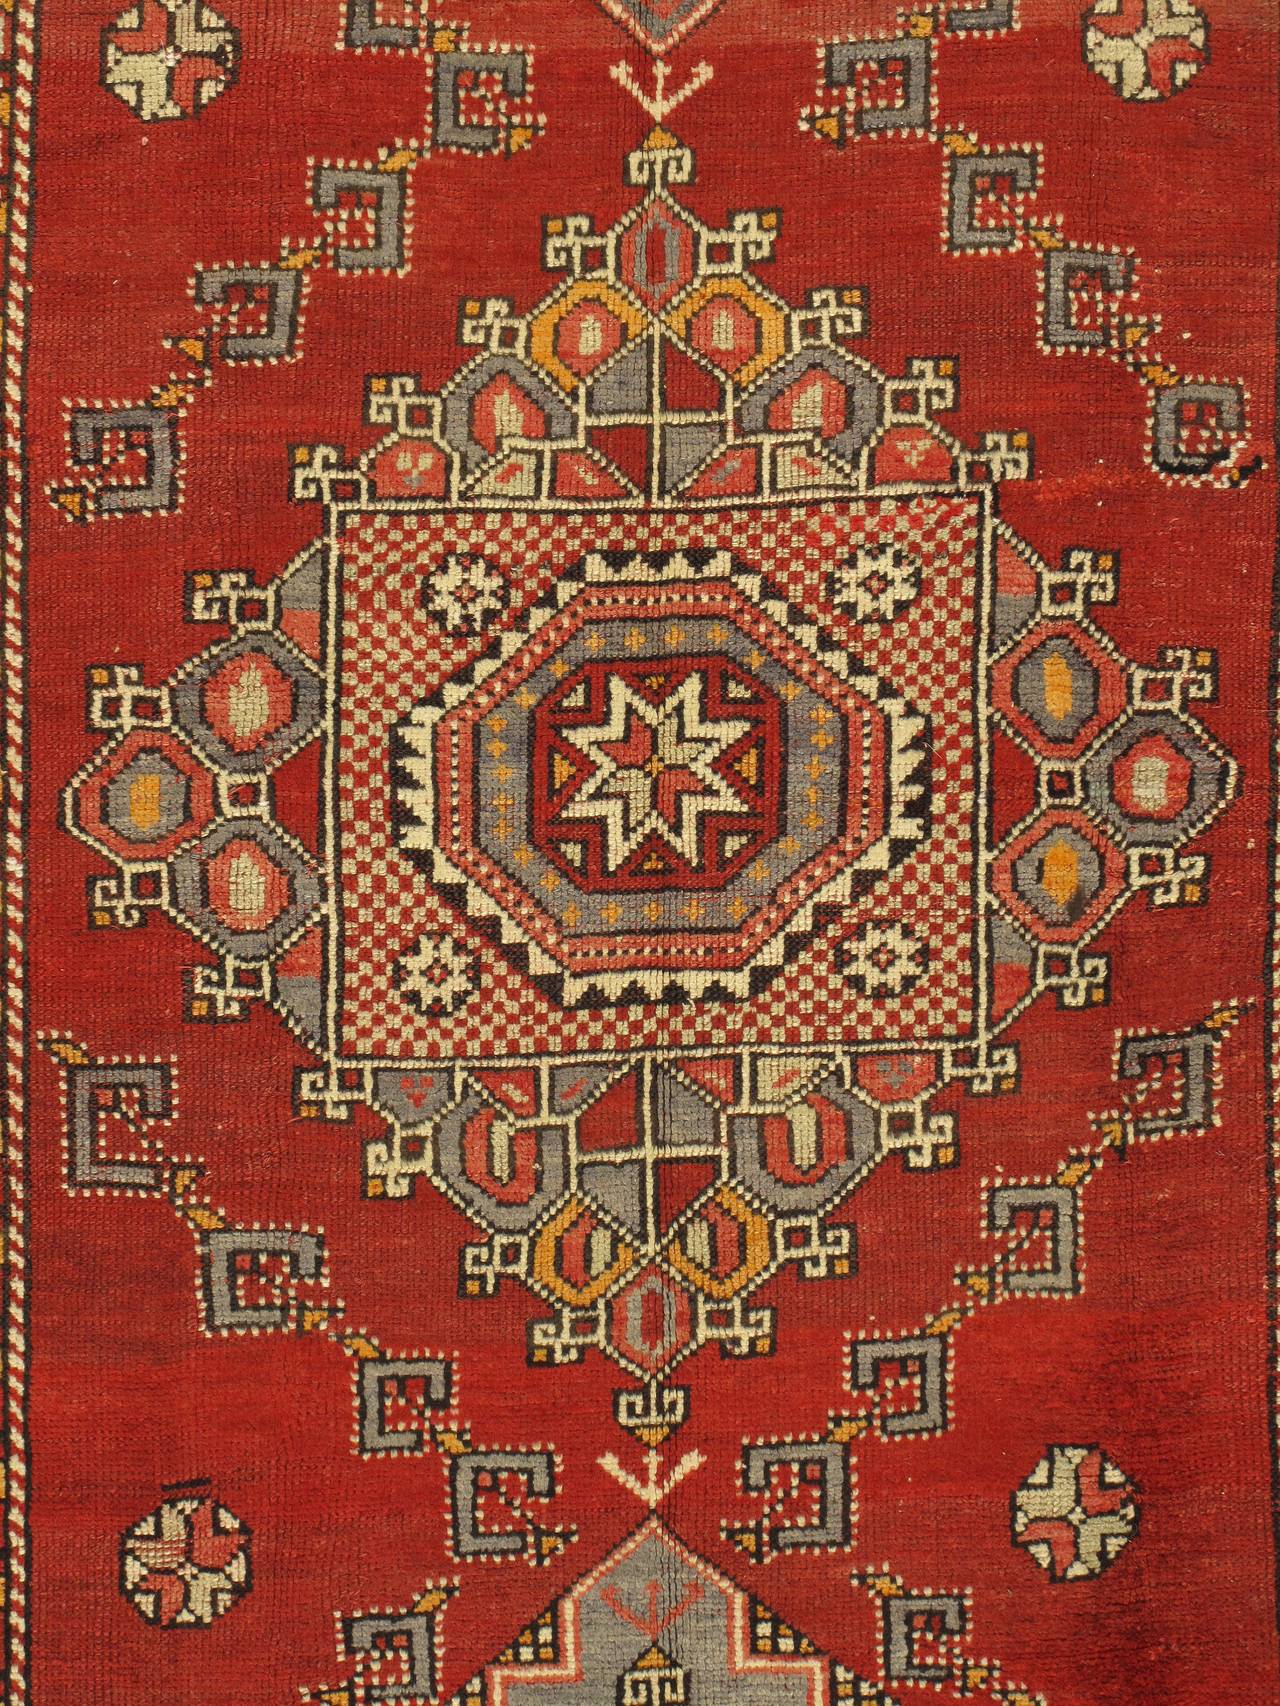 Hand-Woven Vintage Red Turkish Oushak Rug, circa 1940, 5'5 x 8'2 For Sale